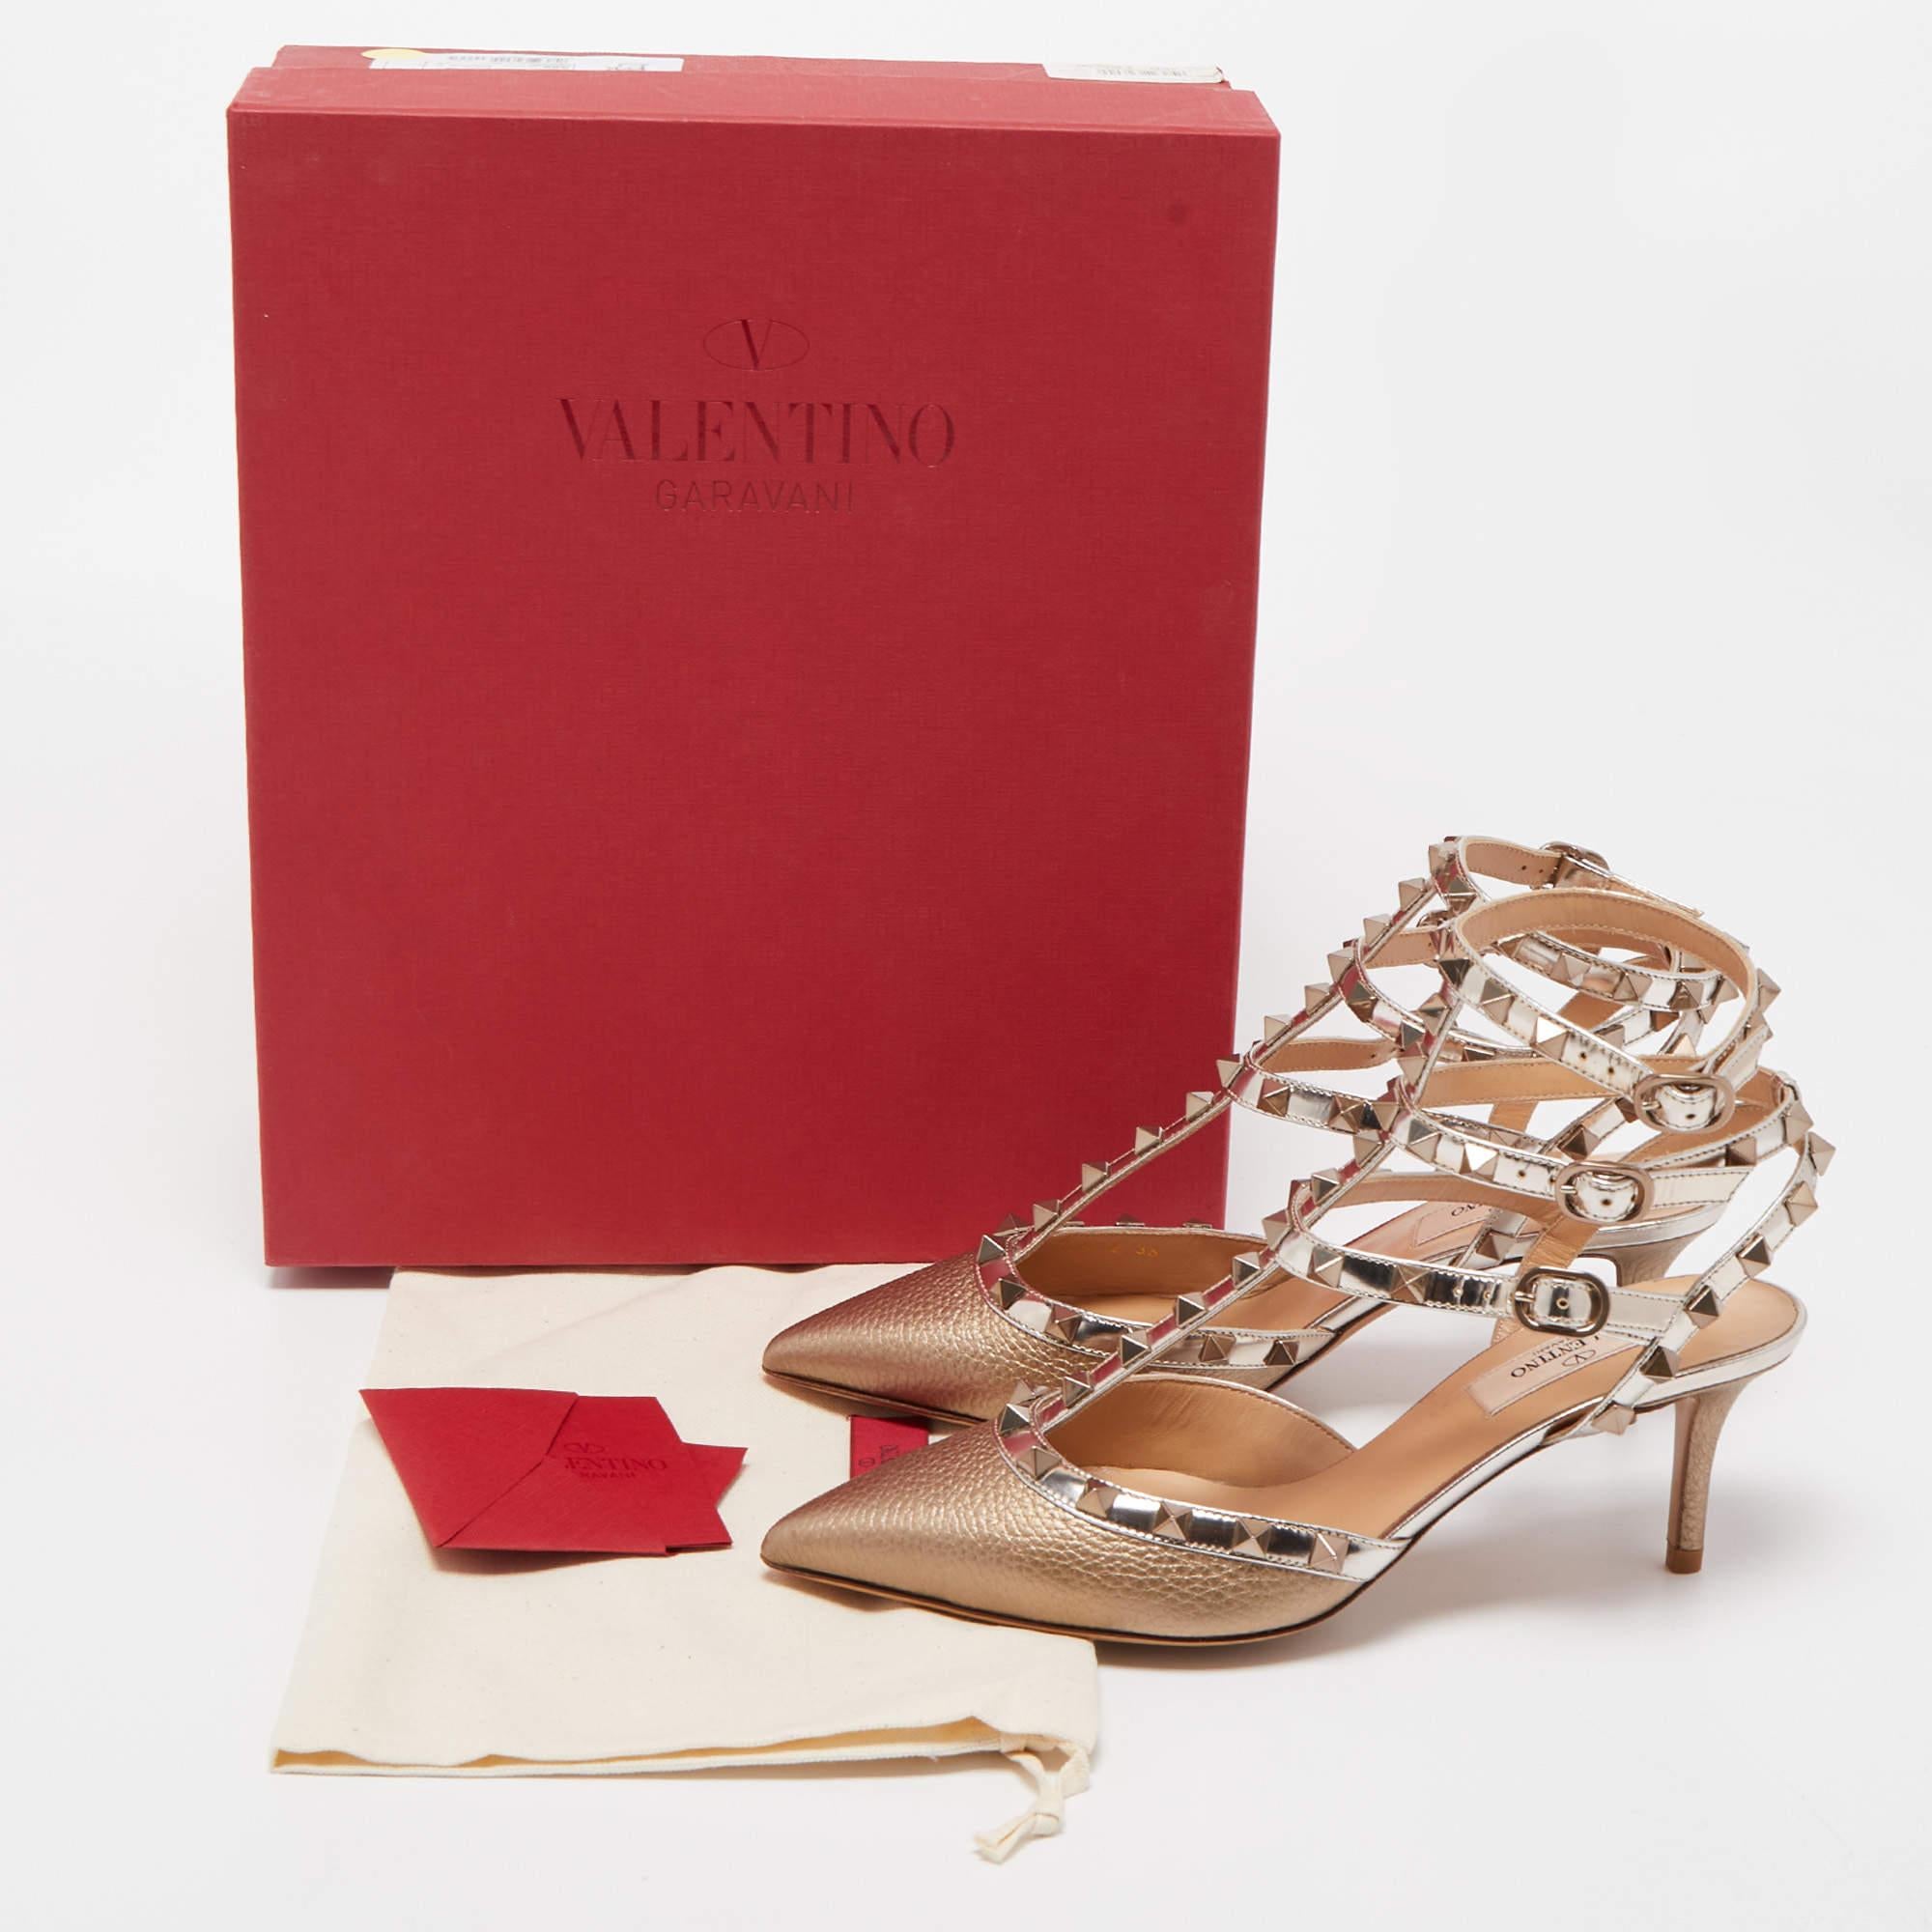 Valentino Metallic Beige Patent and Leather Rockstud Ankle Strap Pumps Size 36 6